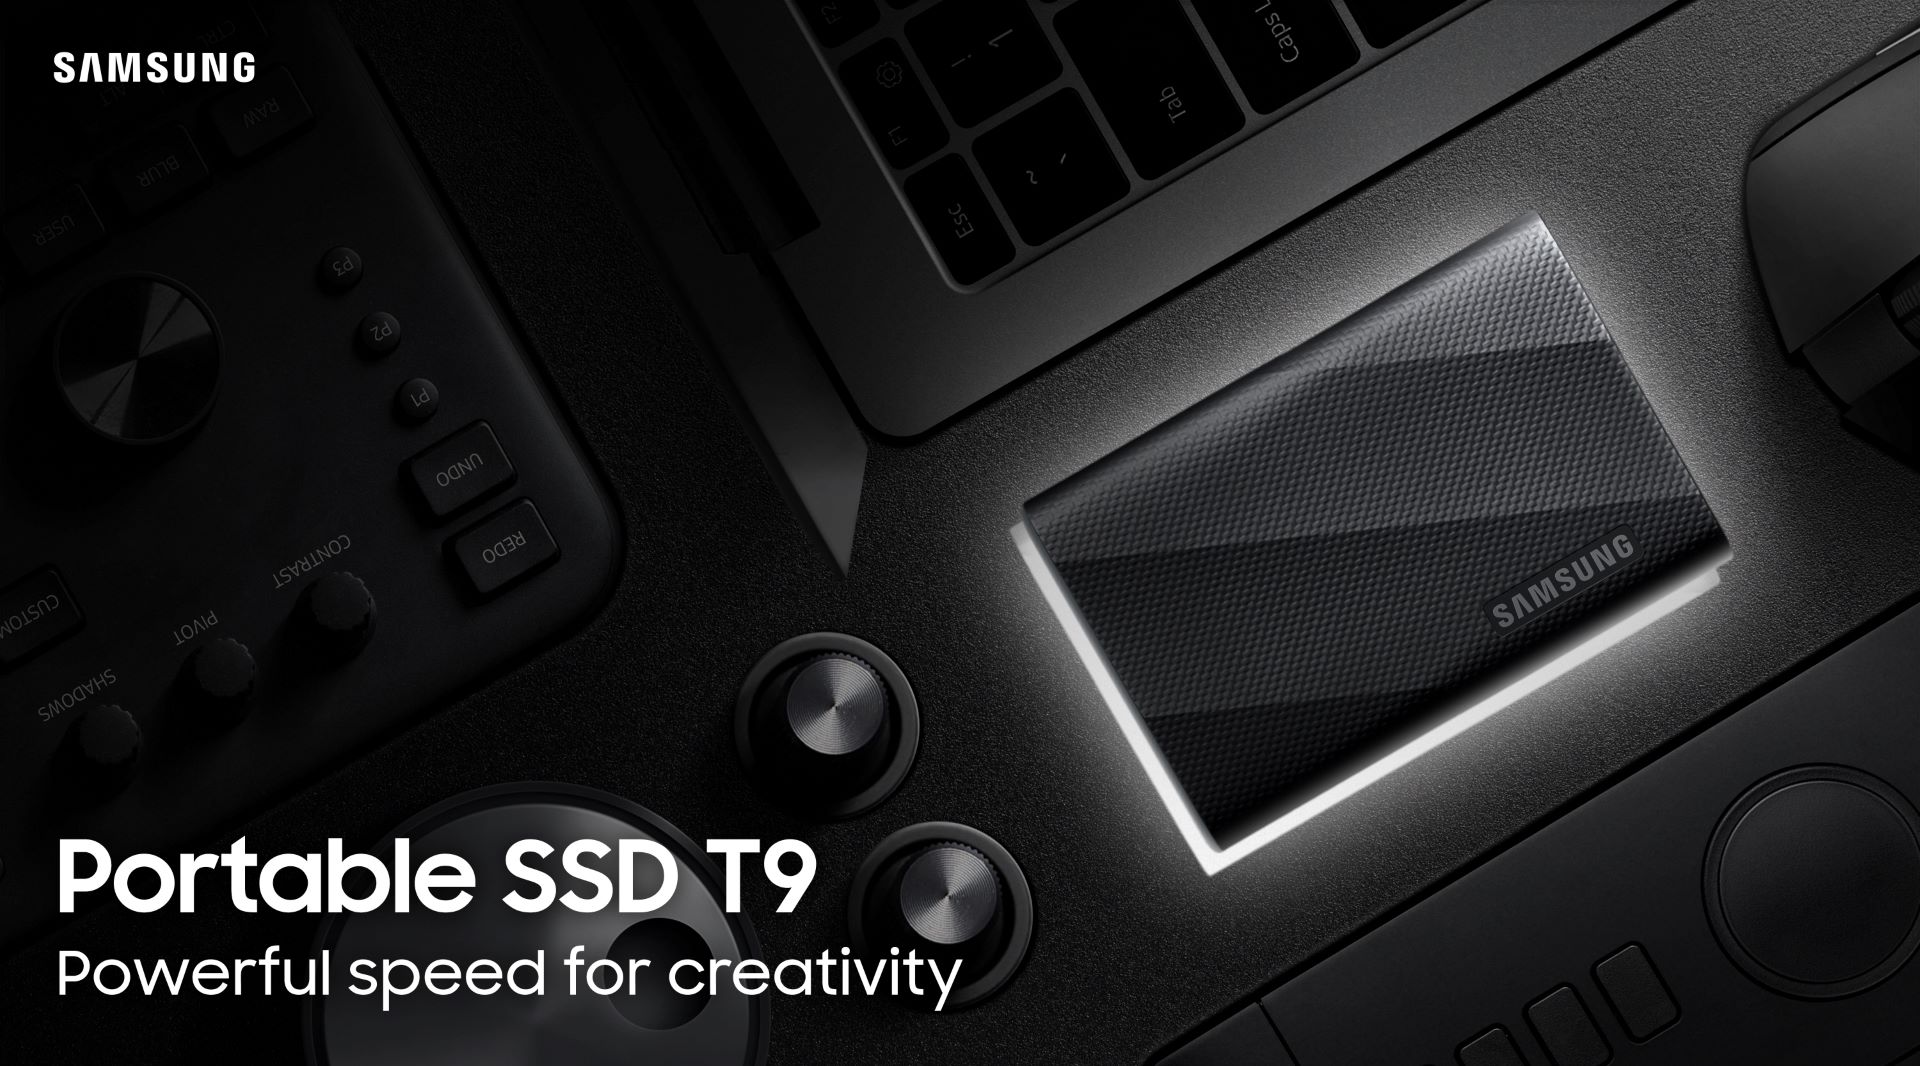 Samsung Introduces Portable SSD T9 with Enhanced Performance and Data Reliability